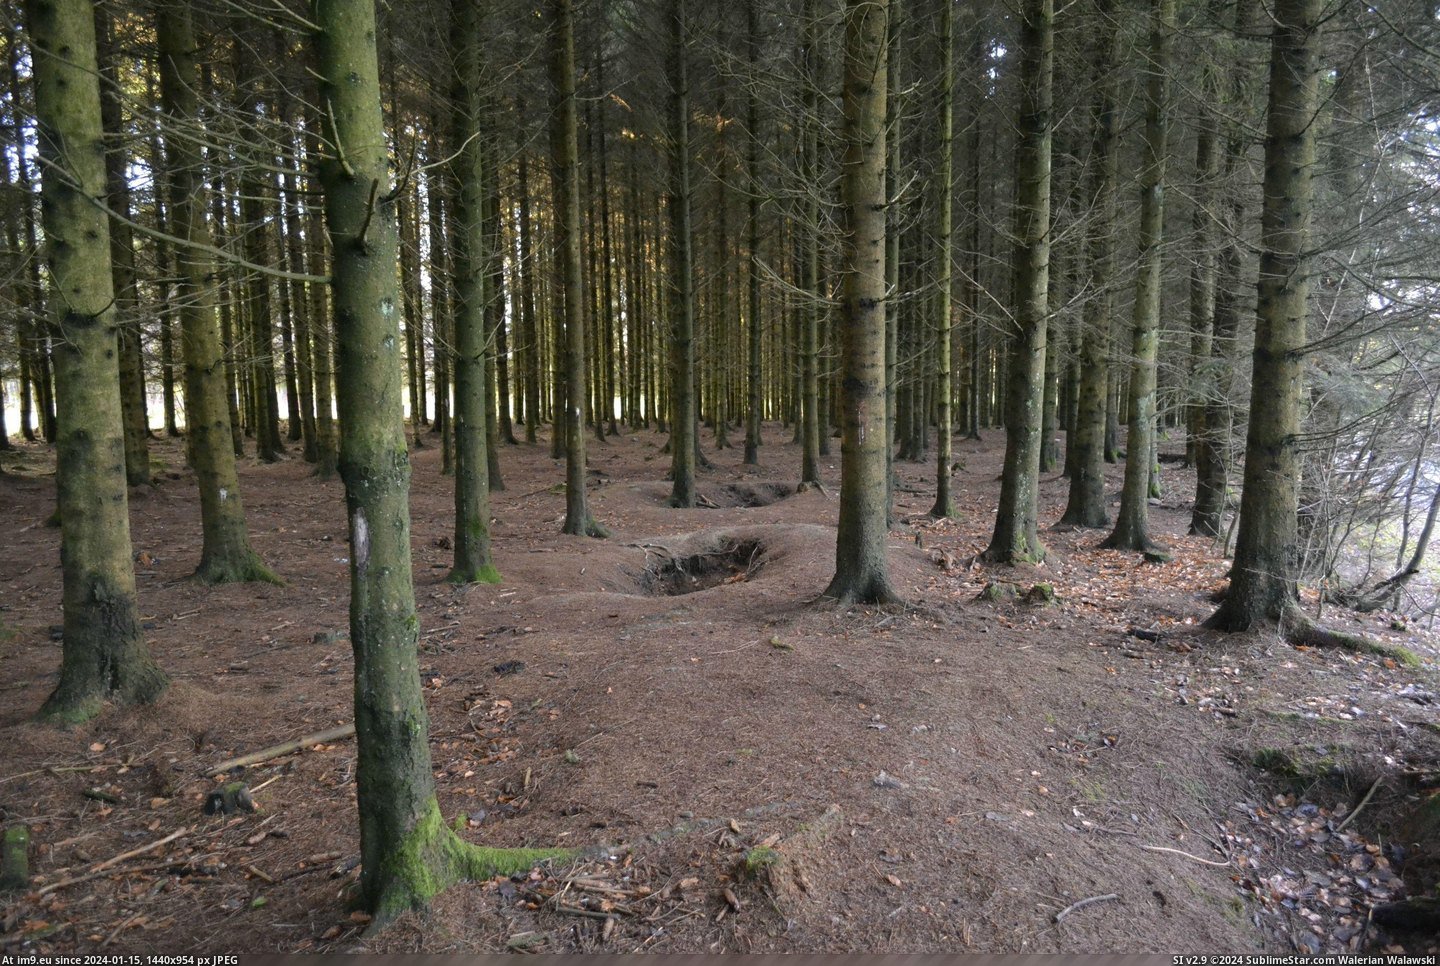 #Years #Ago #Bulge #Bastogne #Foxholes #Couple #Battle [Pics] Battle of the Bulge started today in 1944. Went to Bastogne a couple years ago and took pictures. The foxholes of the 101 Pic. (Image of album My r/PICS favs))